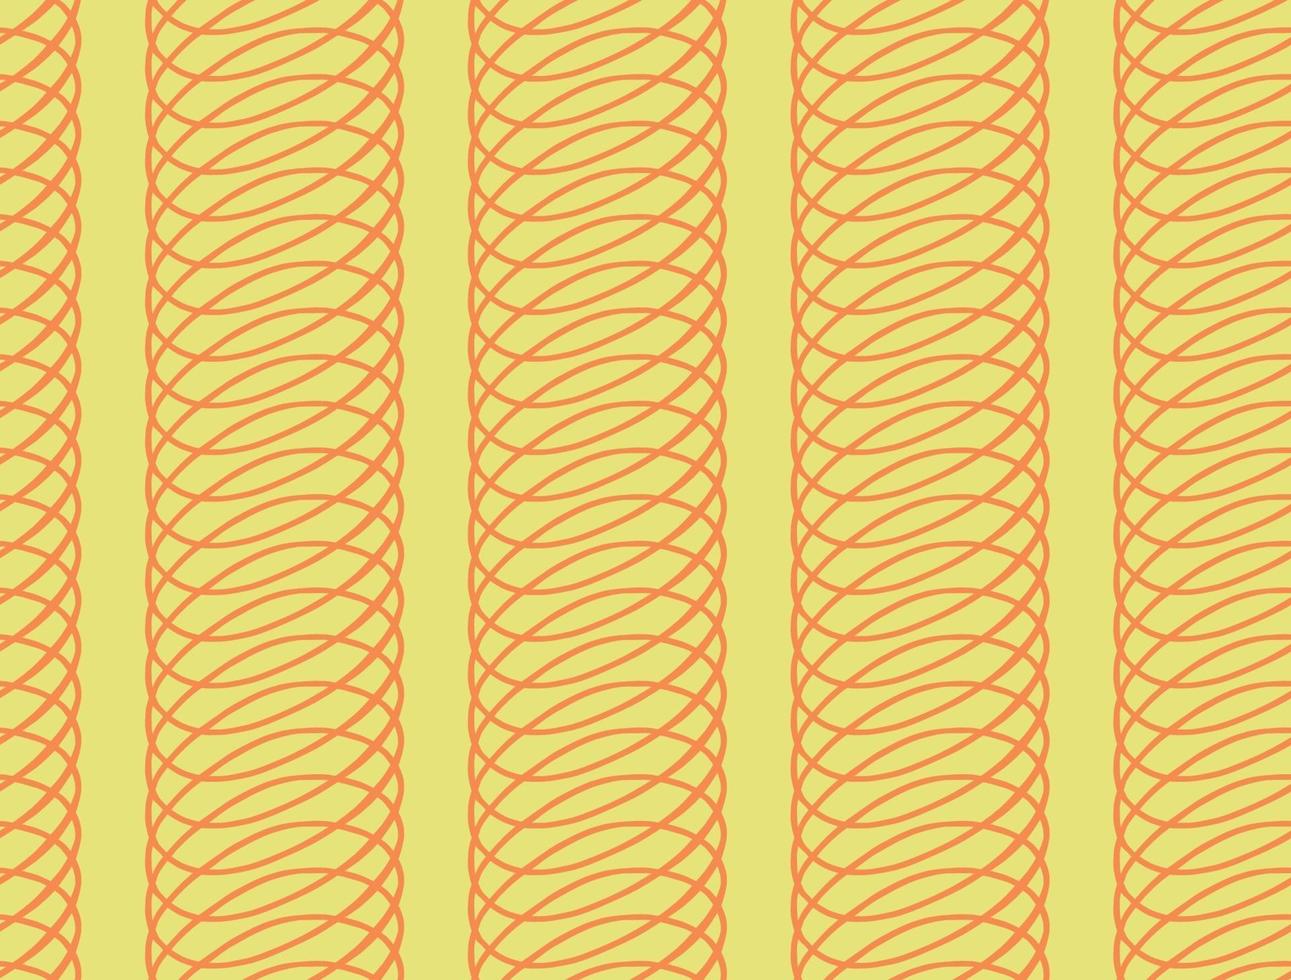 Vector texture background, seamless pattern. Hand drawn, yellow, orange colors.